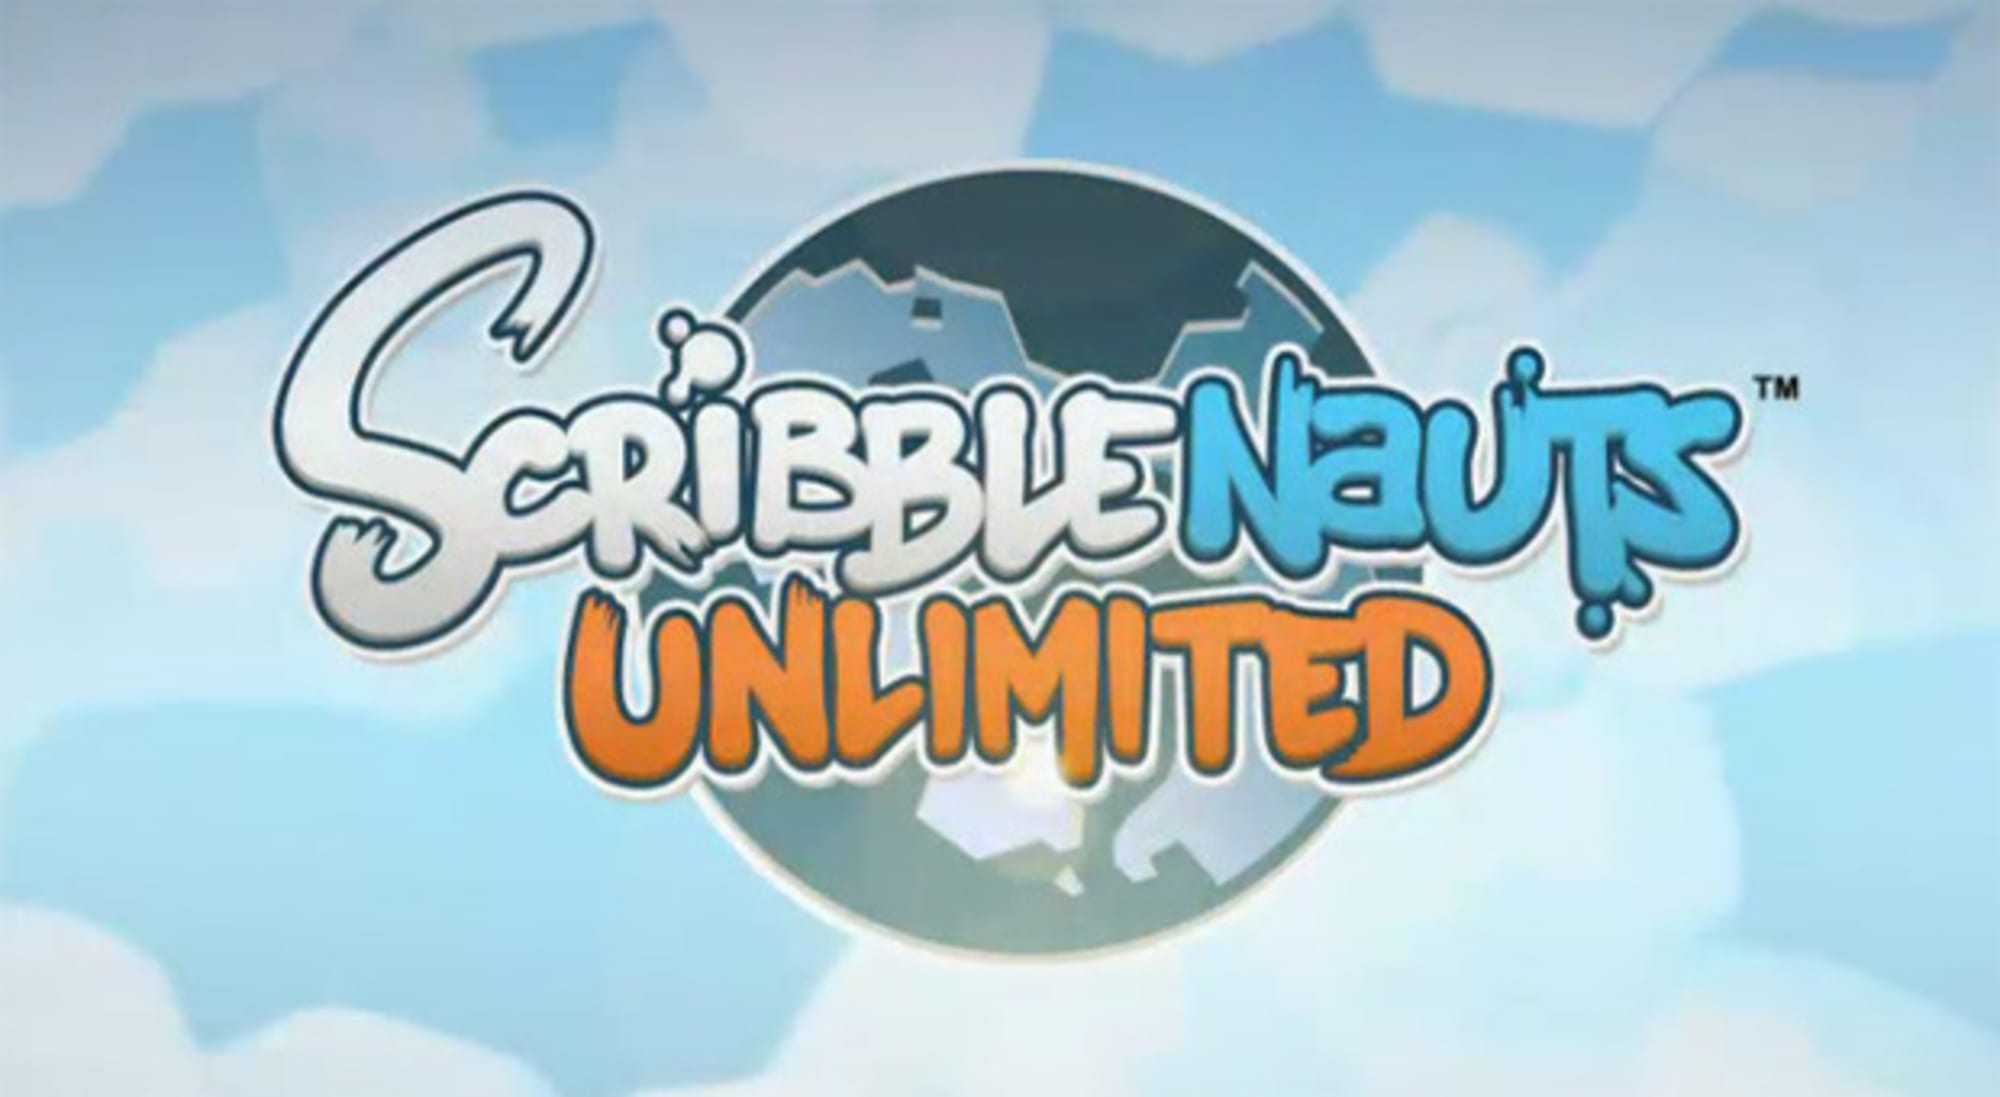 scribblenauts play now free